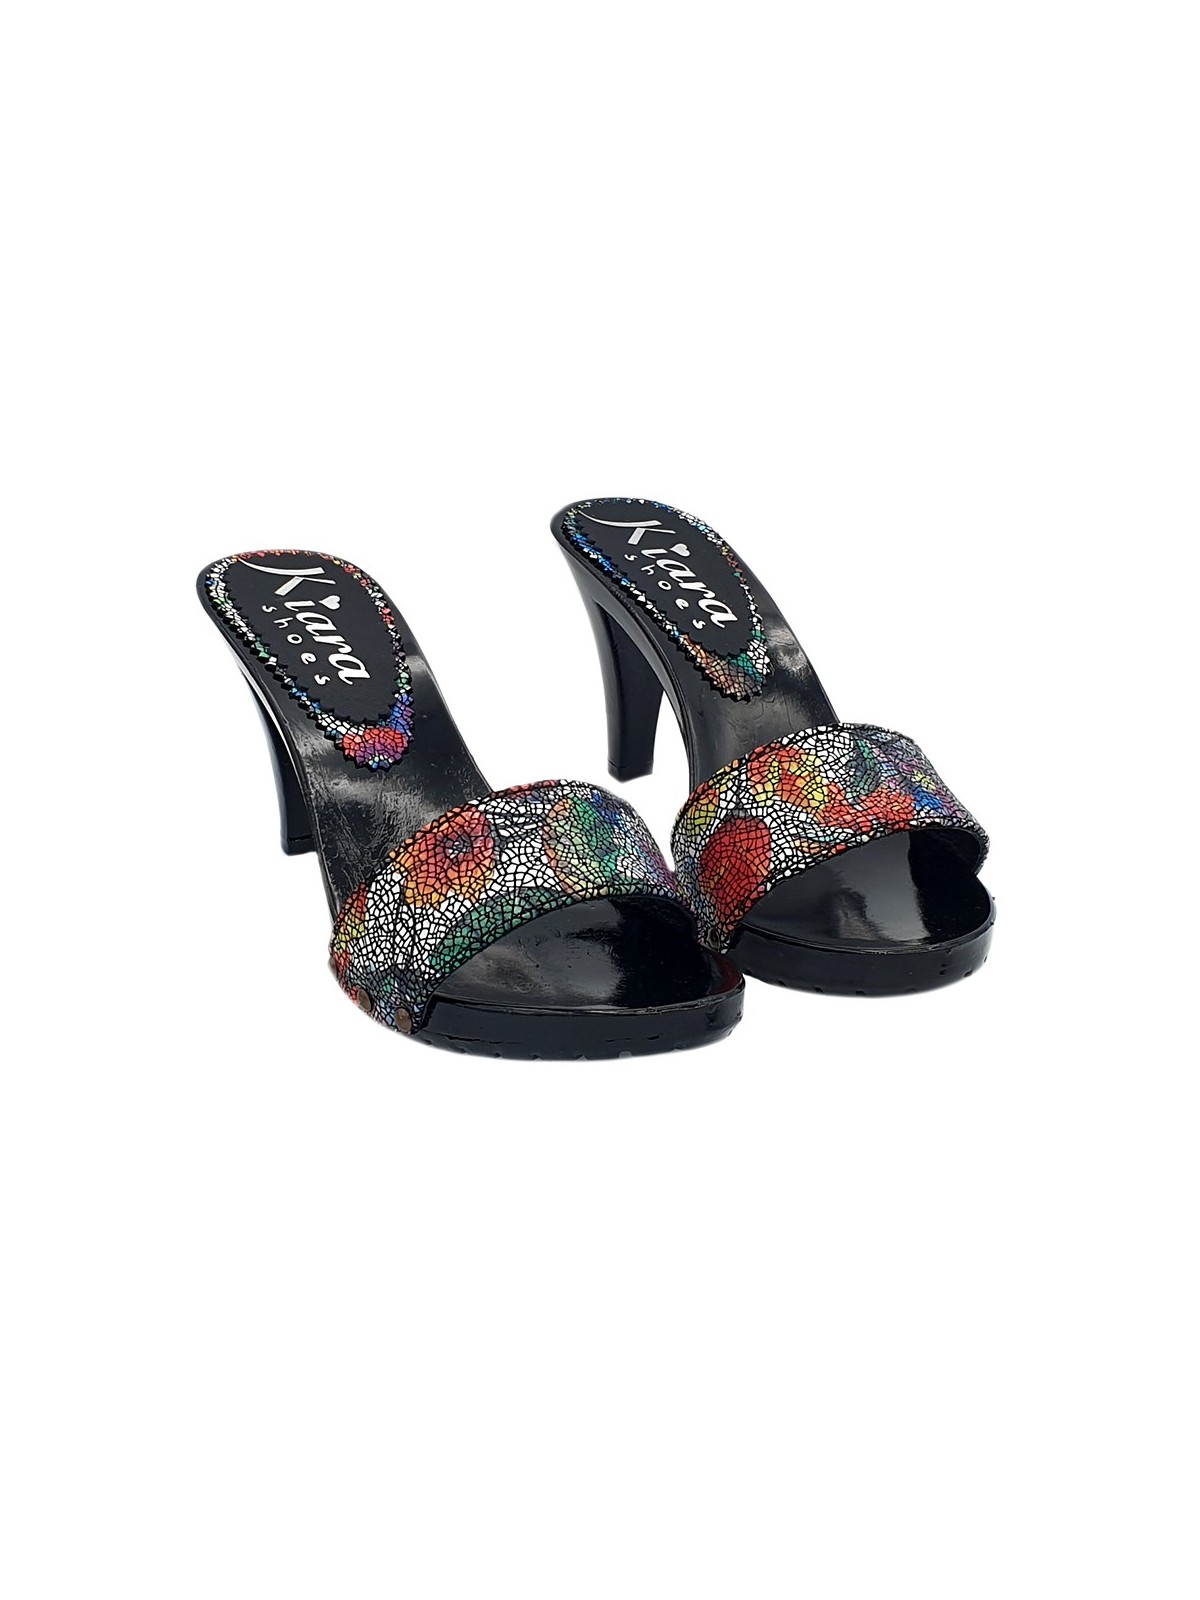 BLACK LACQUERED CLOGS WITH FLORAL DECORATION UPPER